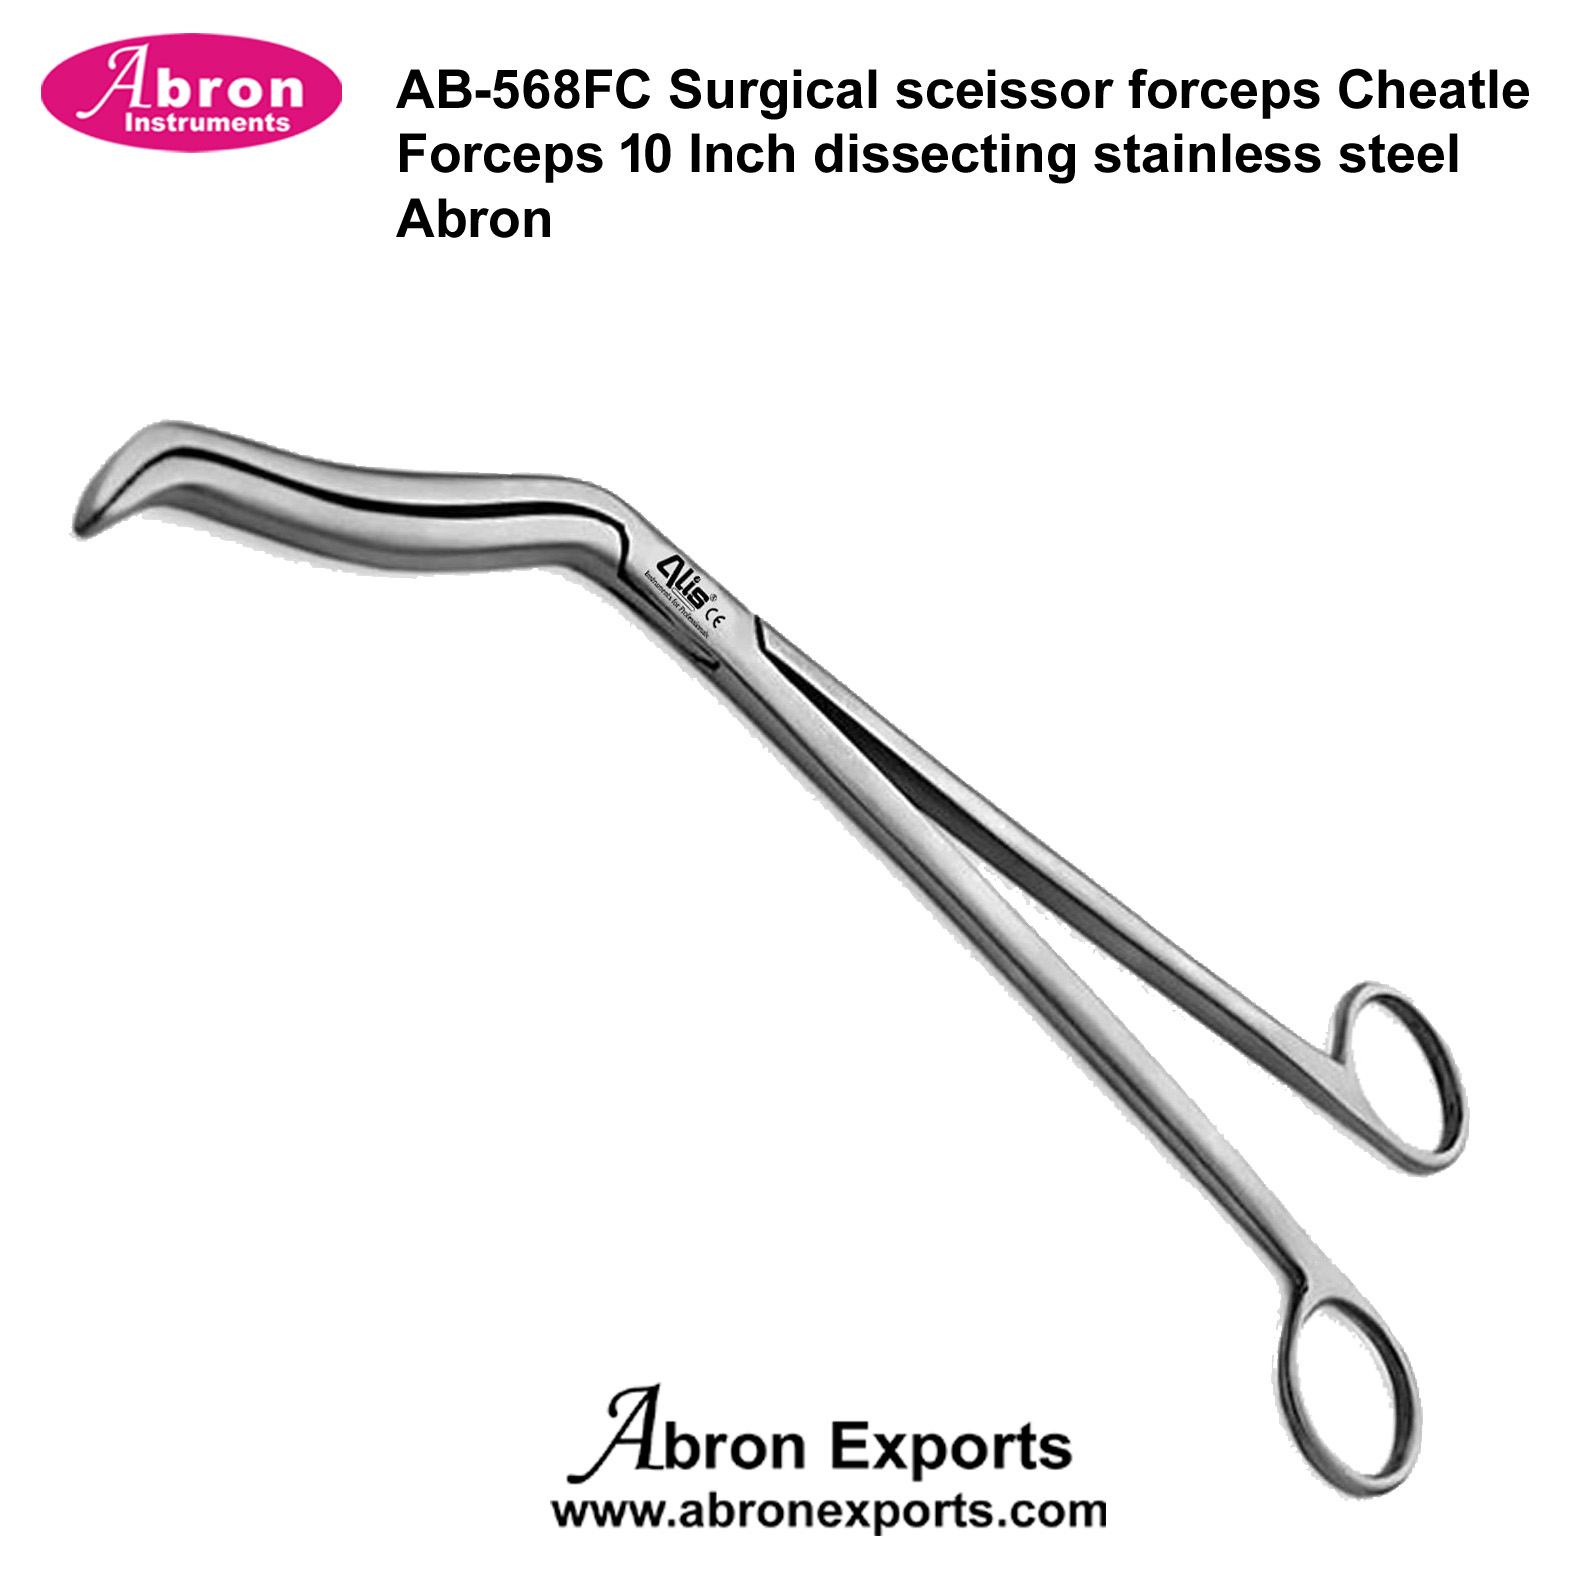 Surgical scissor forceps Cheatle Forceps 10 Inch dissecting stainless steel Abron AB-568FC 